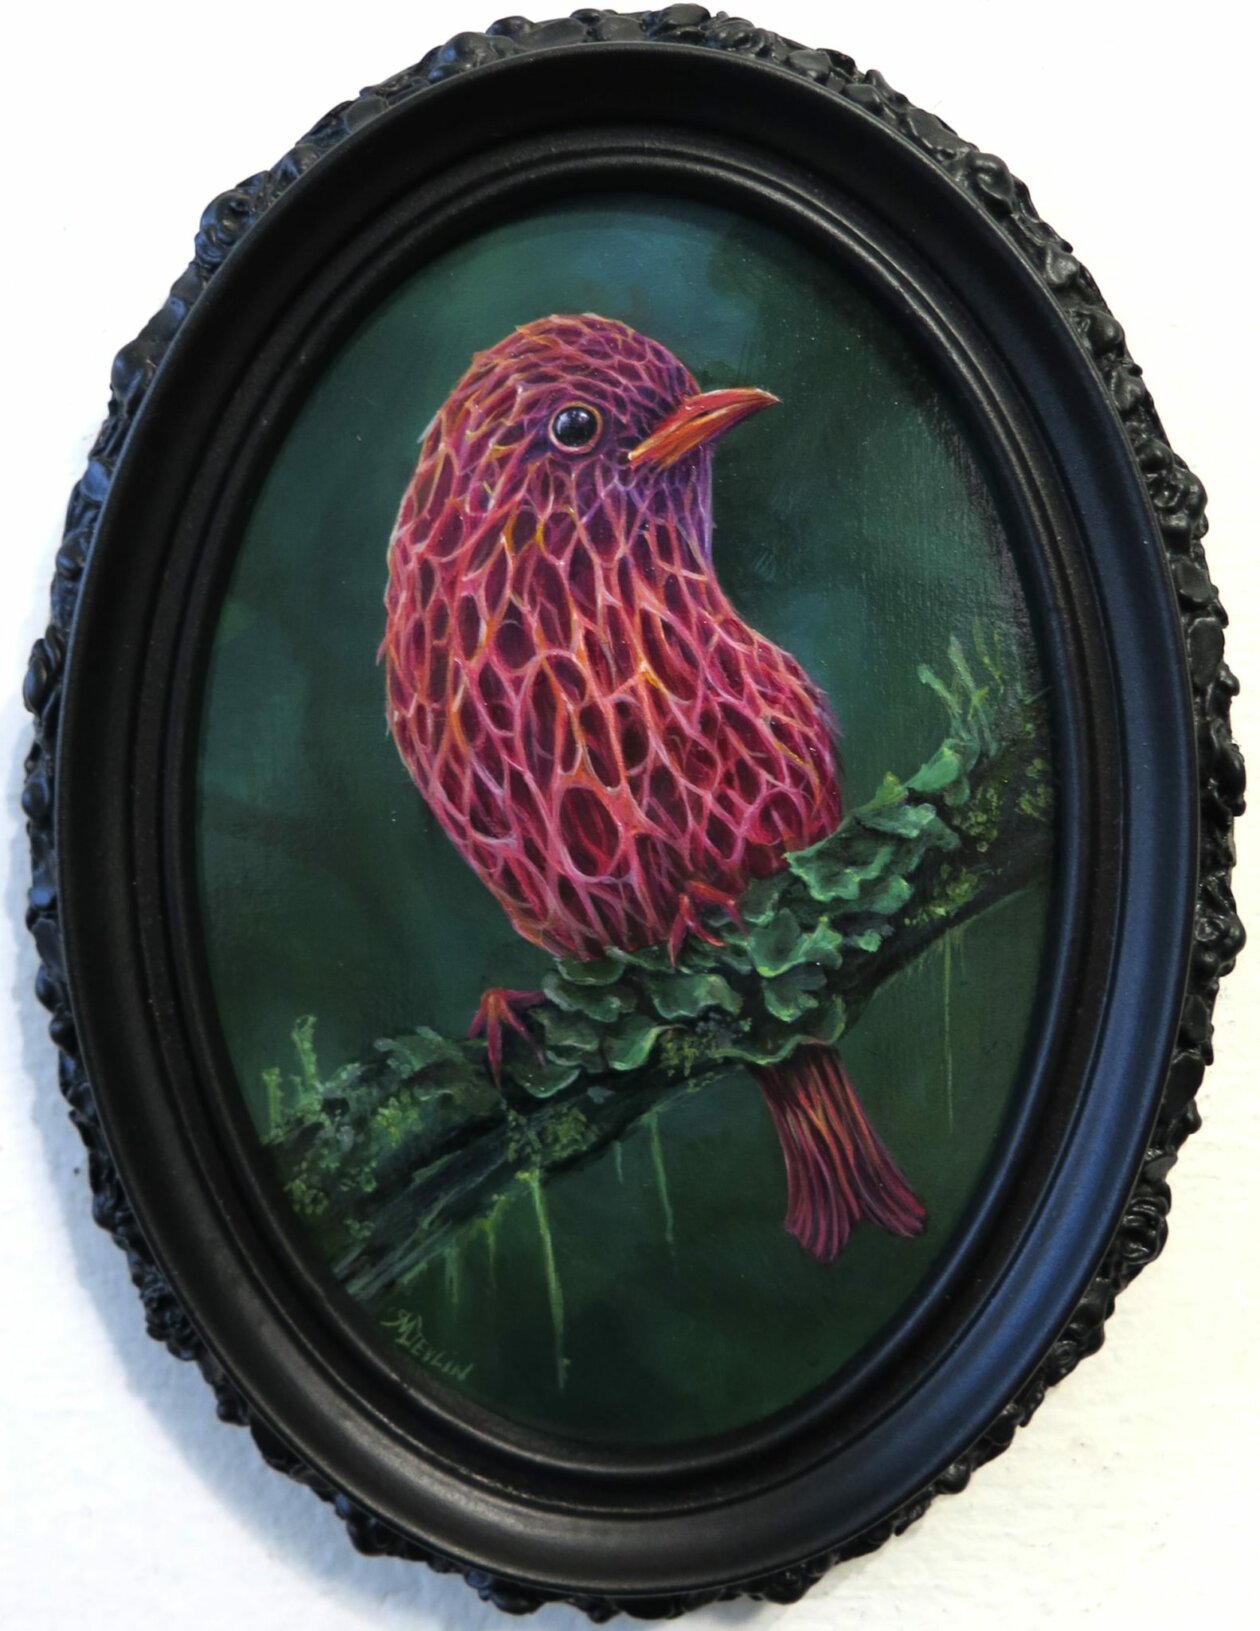 Surrealistic Portrait Paintings Of Animals Composed Of Translucent Botanics By Molly Devlin (8)